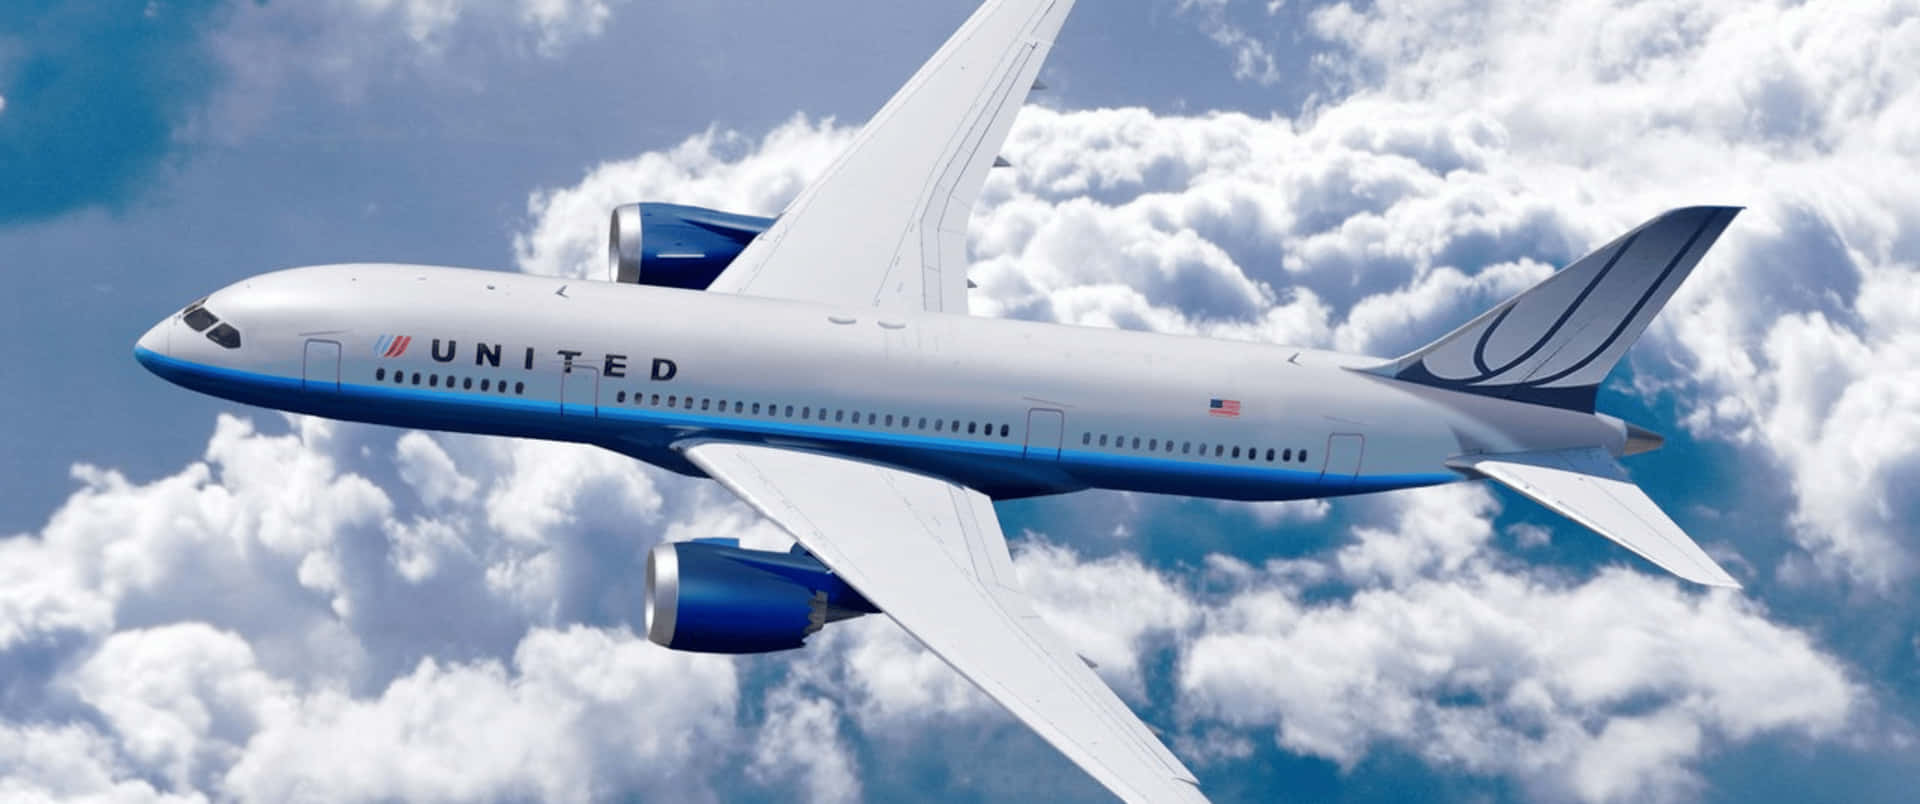 3440x1440p Plane United Airlines Background